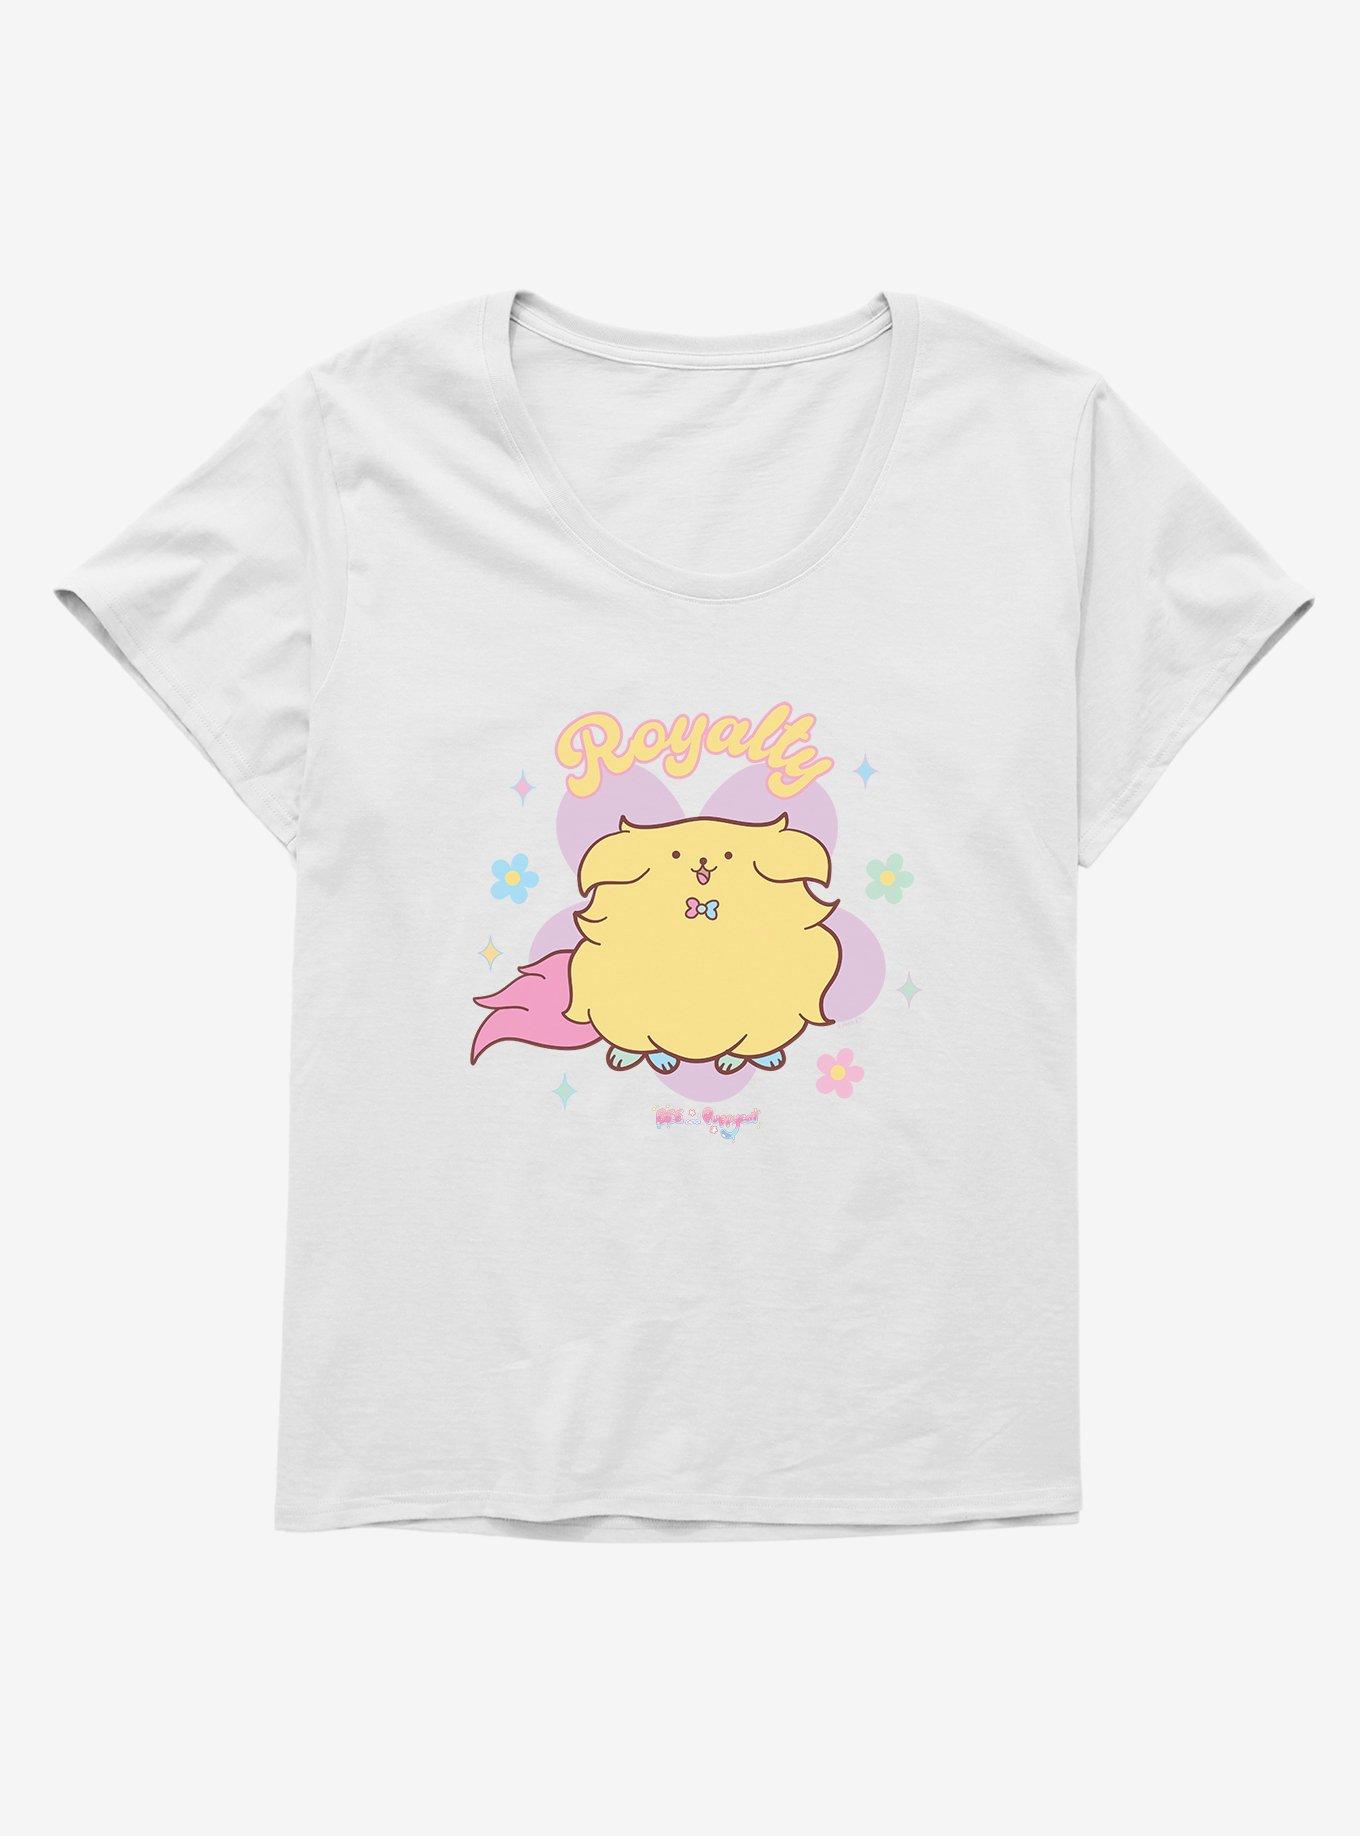 Bee And PuppyCat Royalty Girls T-Shirt Plus Size, WHITE, hi-res